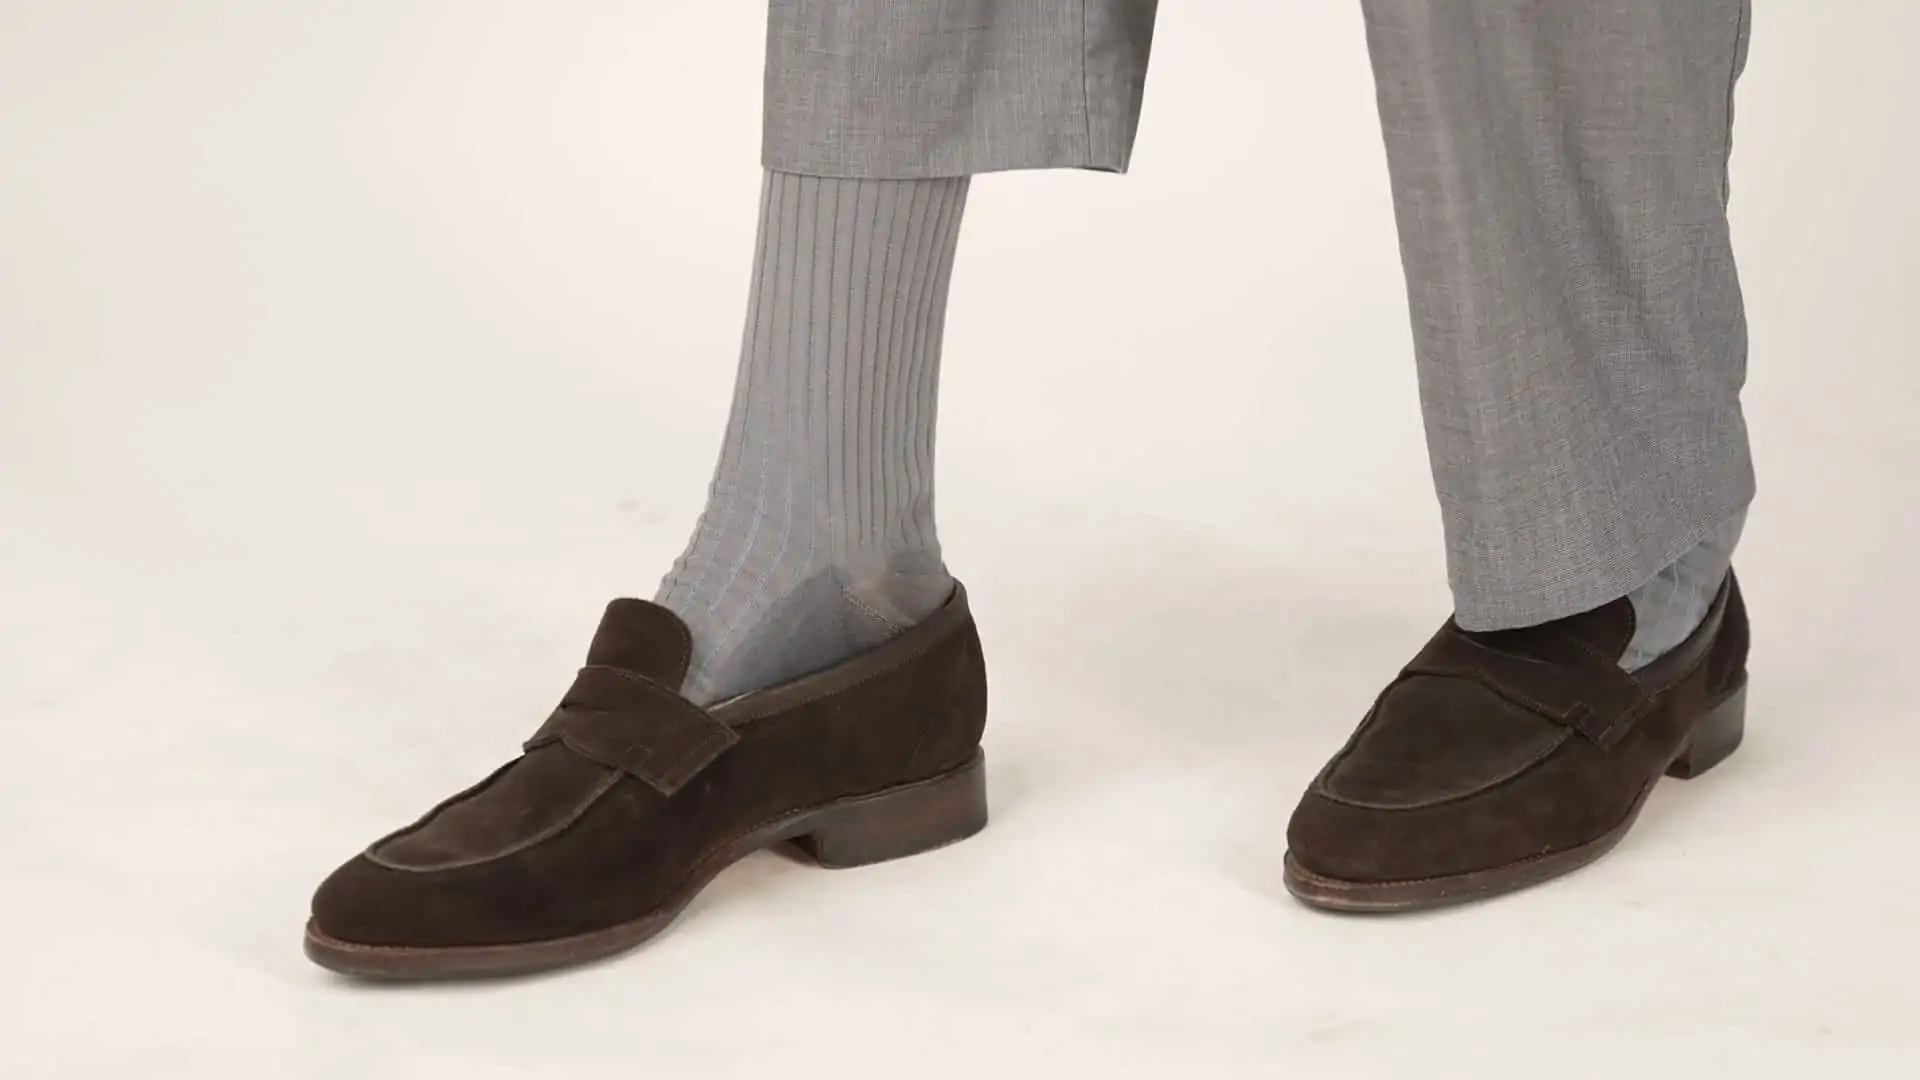 Preston wearing chocolate brown suede loafers paired with shadow-striped socks in light blue and gray.